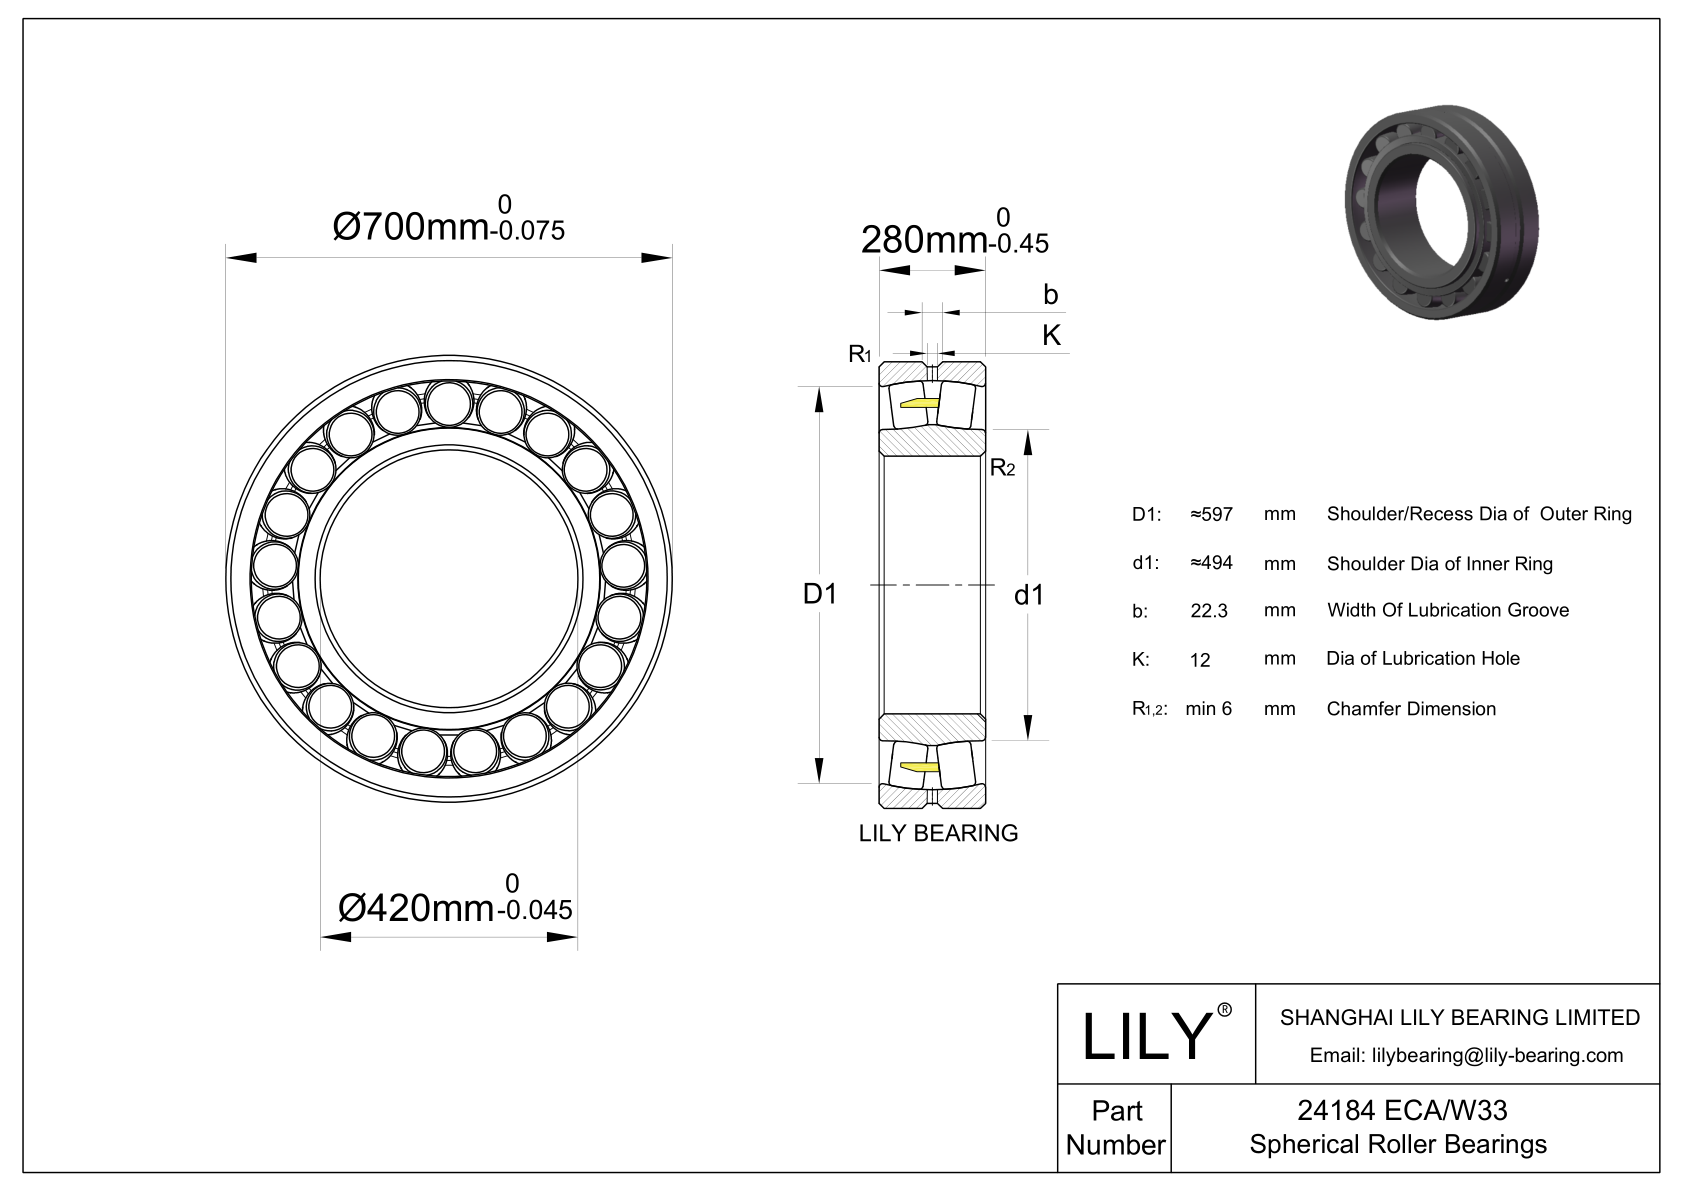 24184 ECA/W33 Double Row Spherical Roller Bearing cad drawing